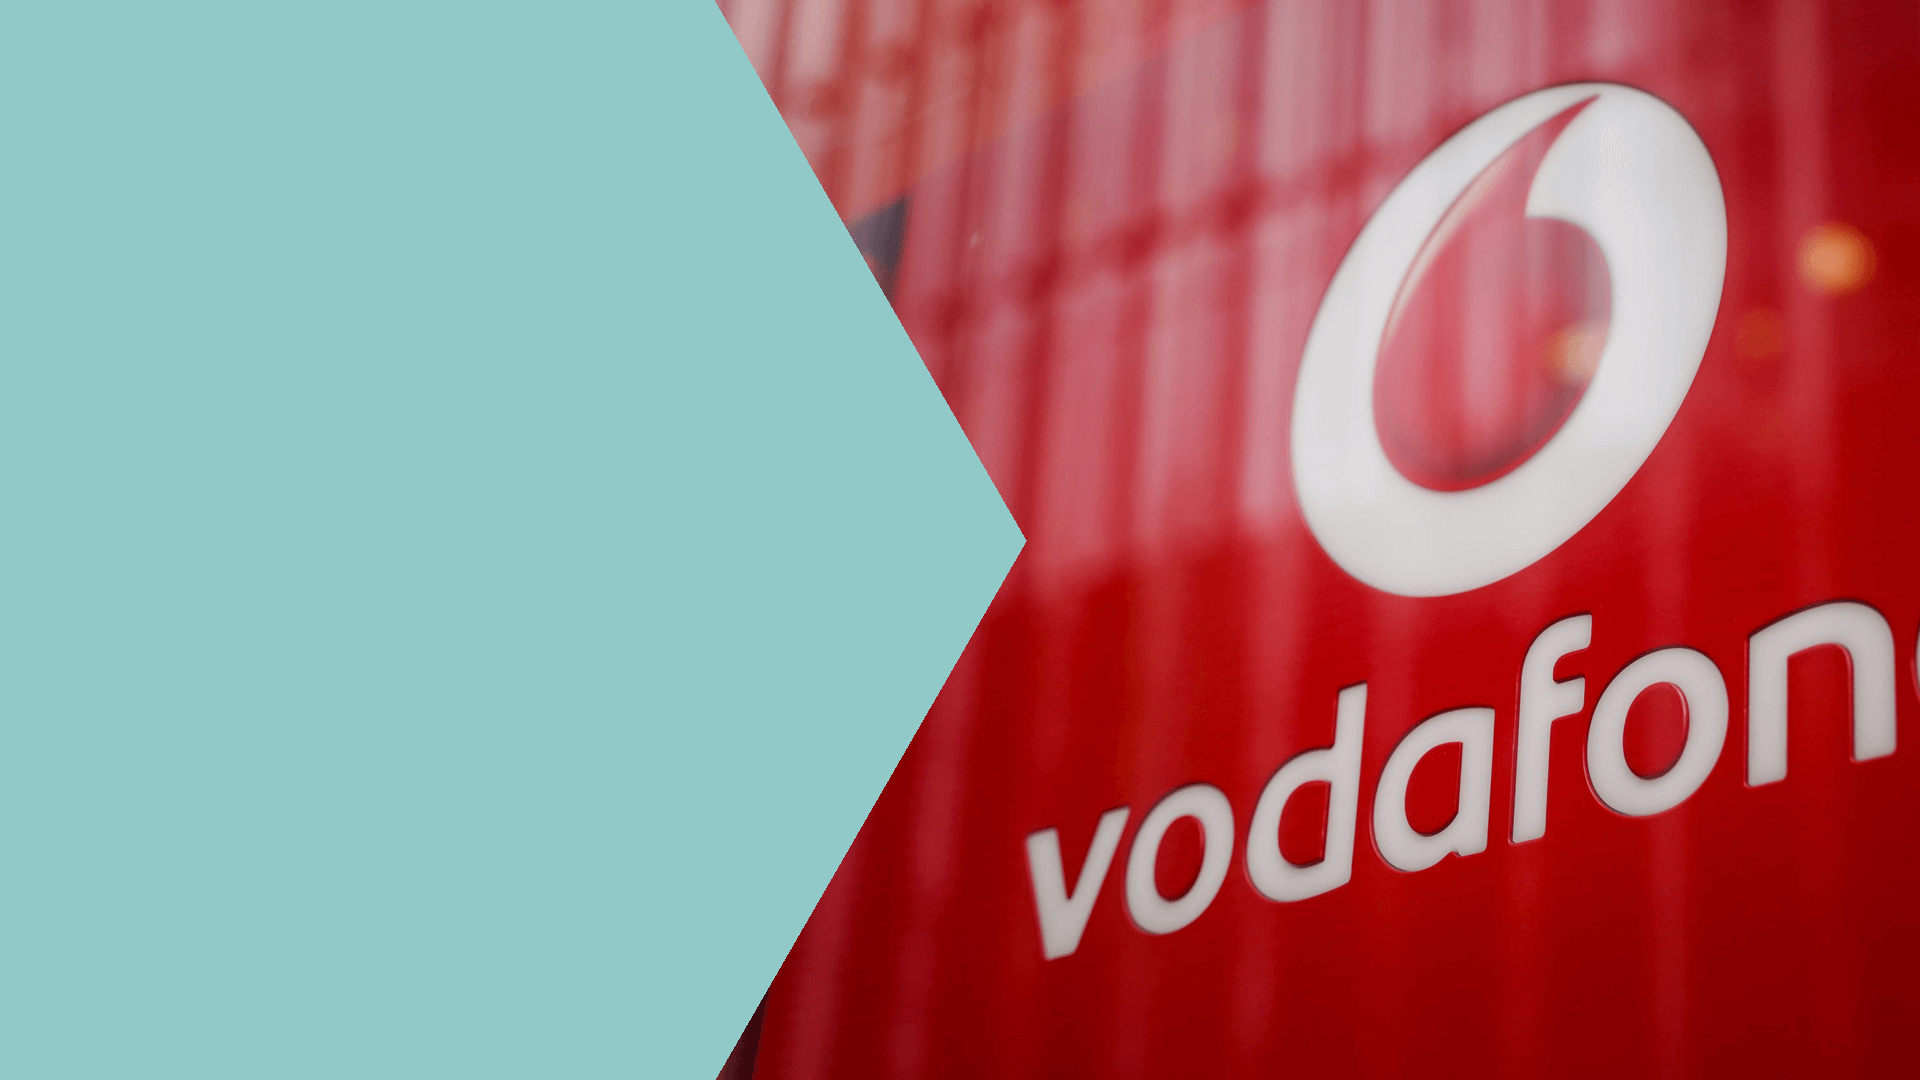 Imagesound Projects - Vodafone